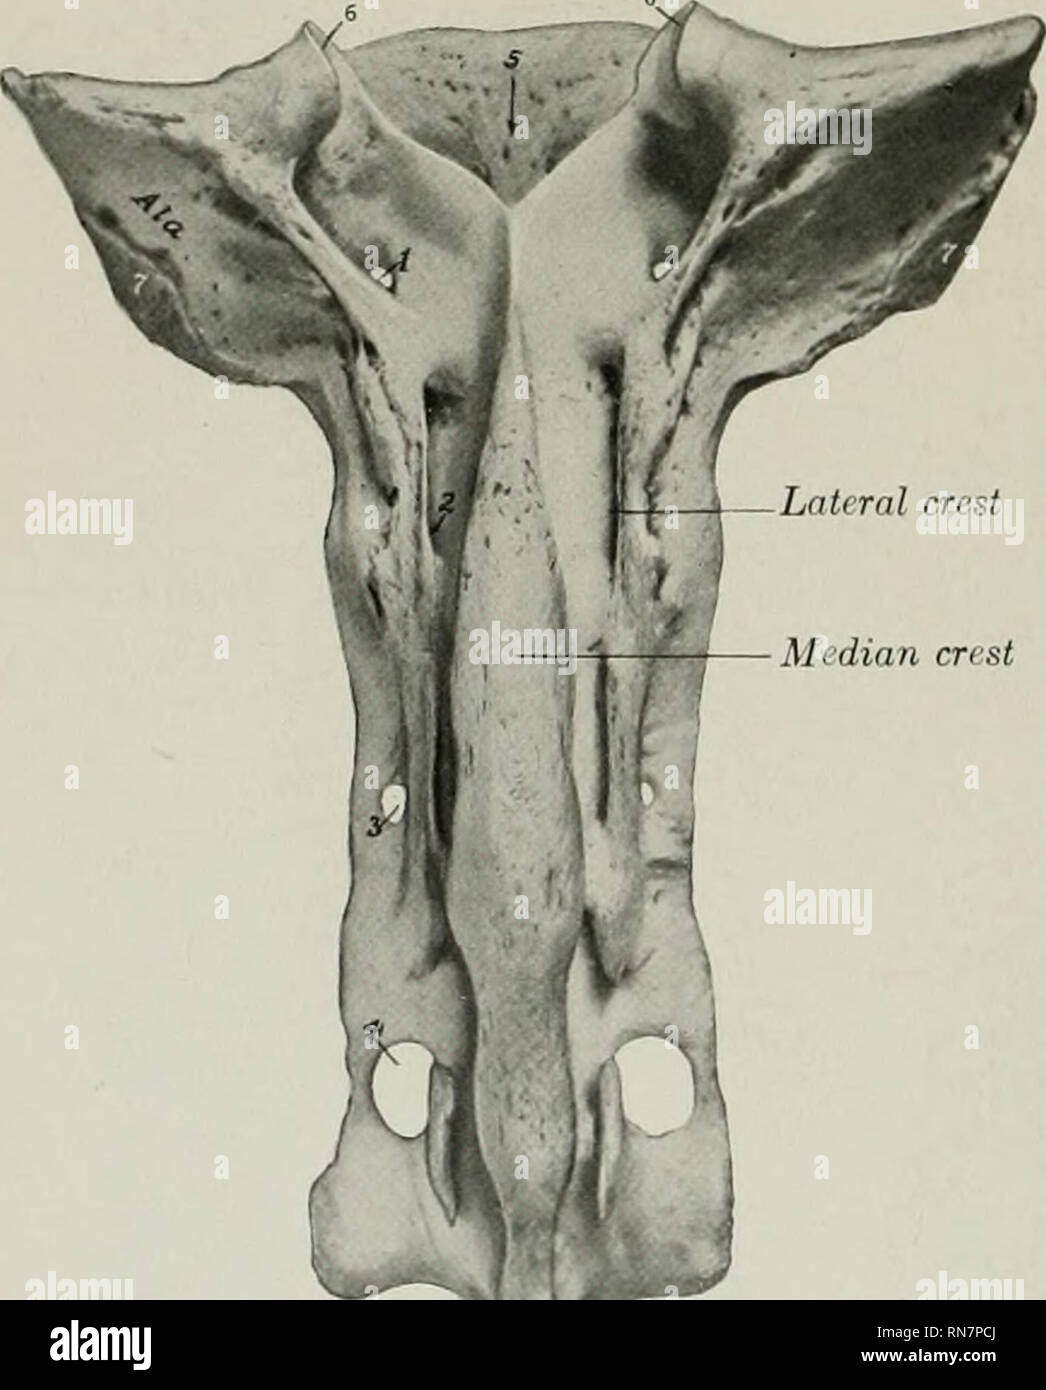 . The anatomy of the domestic animals. Veterinary anatomy. processes: 5. spinous process; C, transverse process. Median crest ess is thick and strong, and l)ears a rounded mammillary process (except at the posterior end of the series); the last two, although prominent, do not always articu- late with the ribs. The spinous process is long. The first is much higher than in the horse, the next two are usu- ally the most prominent, and be- hind this there is a very gradual diminution in height. The back- ward slope, slight at first, in- creases to the tenth; the last is vertical and lumbar in char Stock Photo